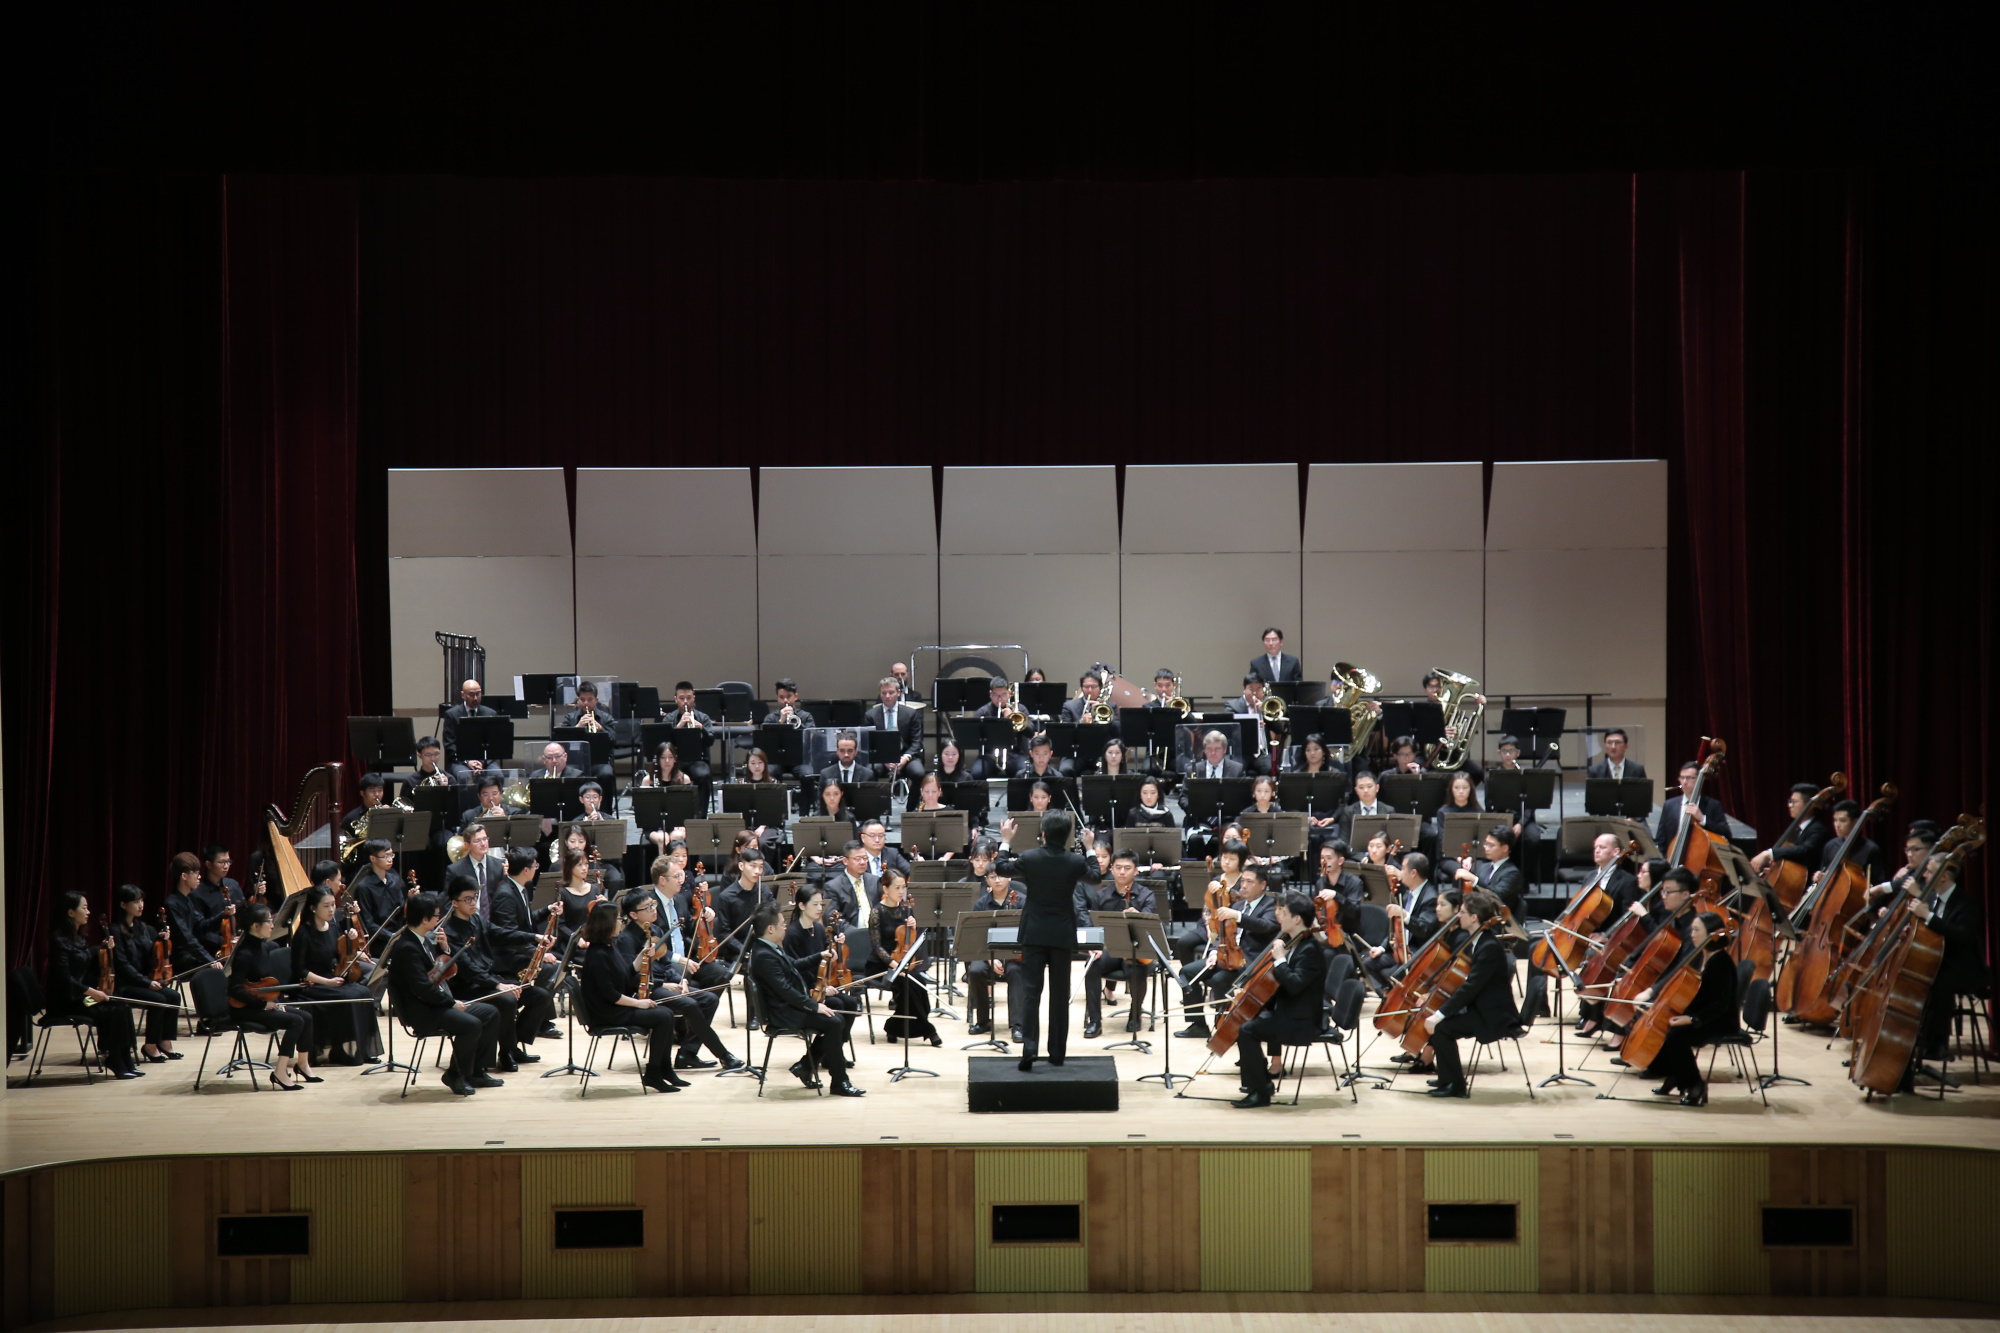 Macao Orchestra on Stage March events macau